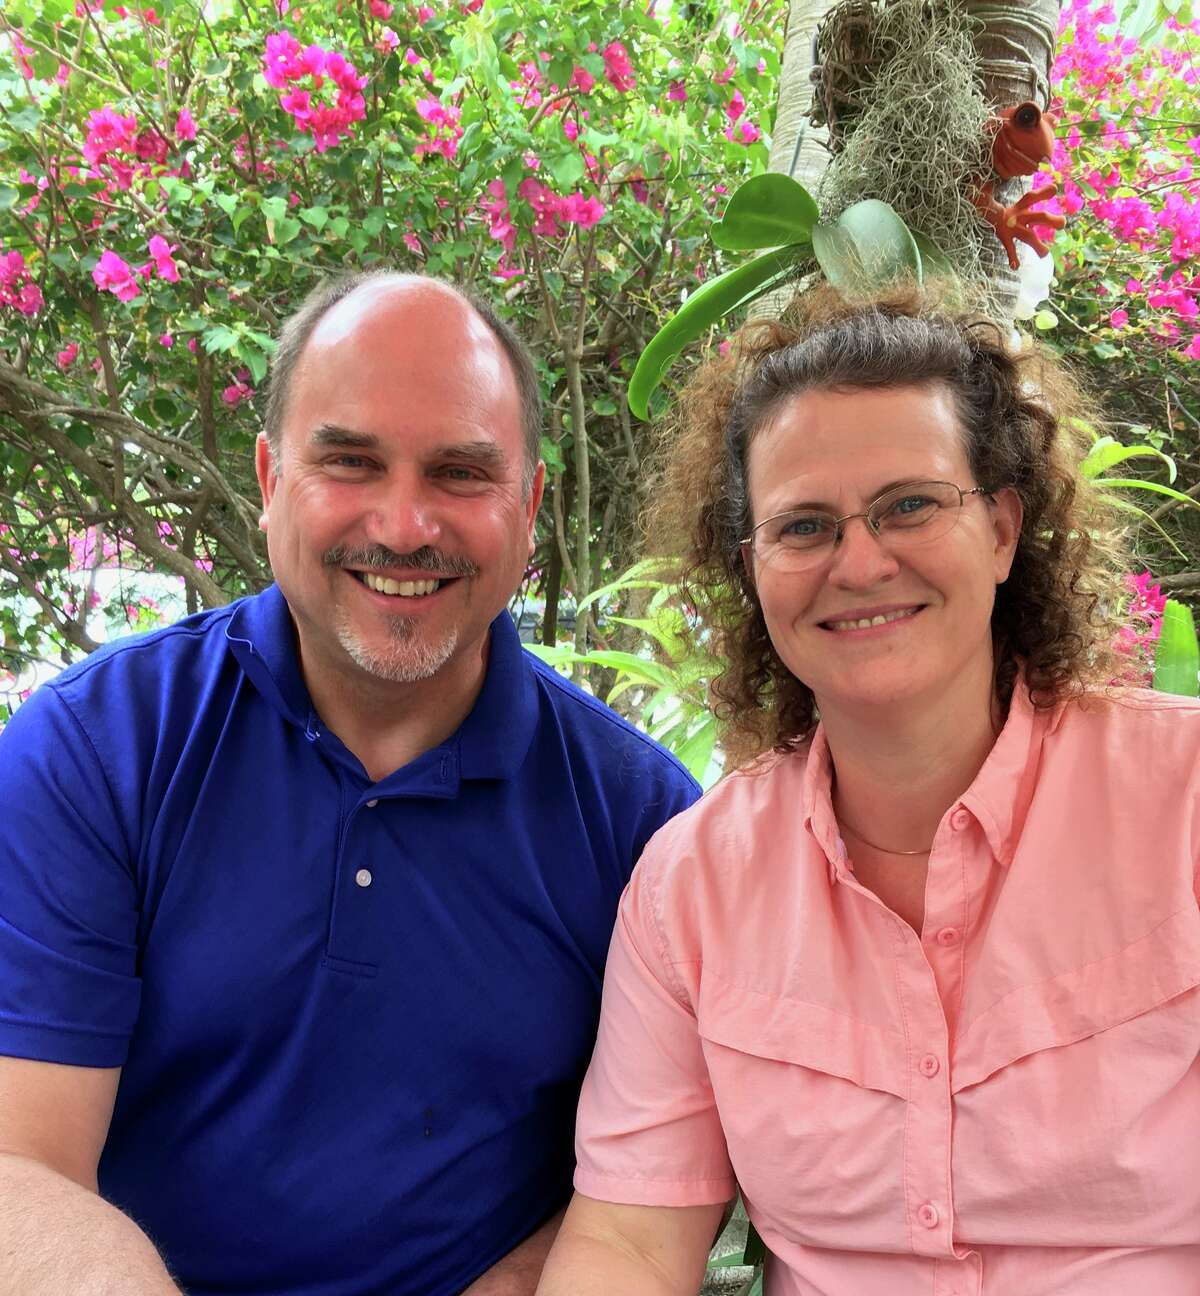 A benefit Lunch is being held at the Bad Axe Free Methodist Church,  for Coleen Sutton, pictured here with her husband Jerry, who was diagnosed with colon cancer in November.